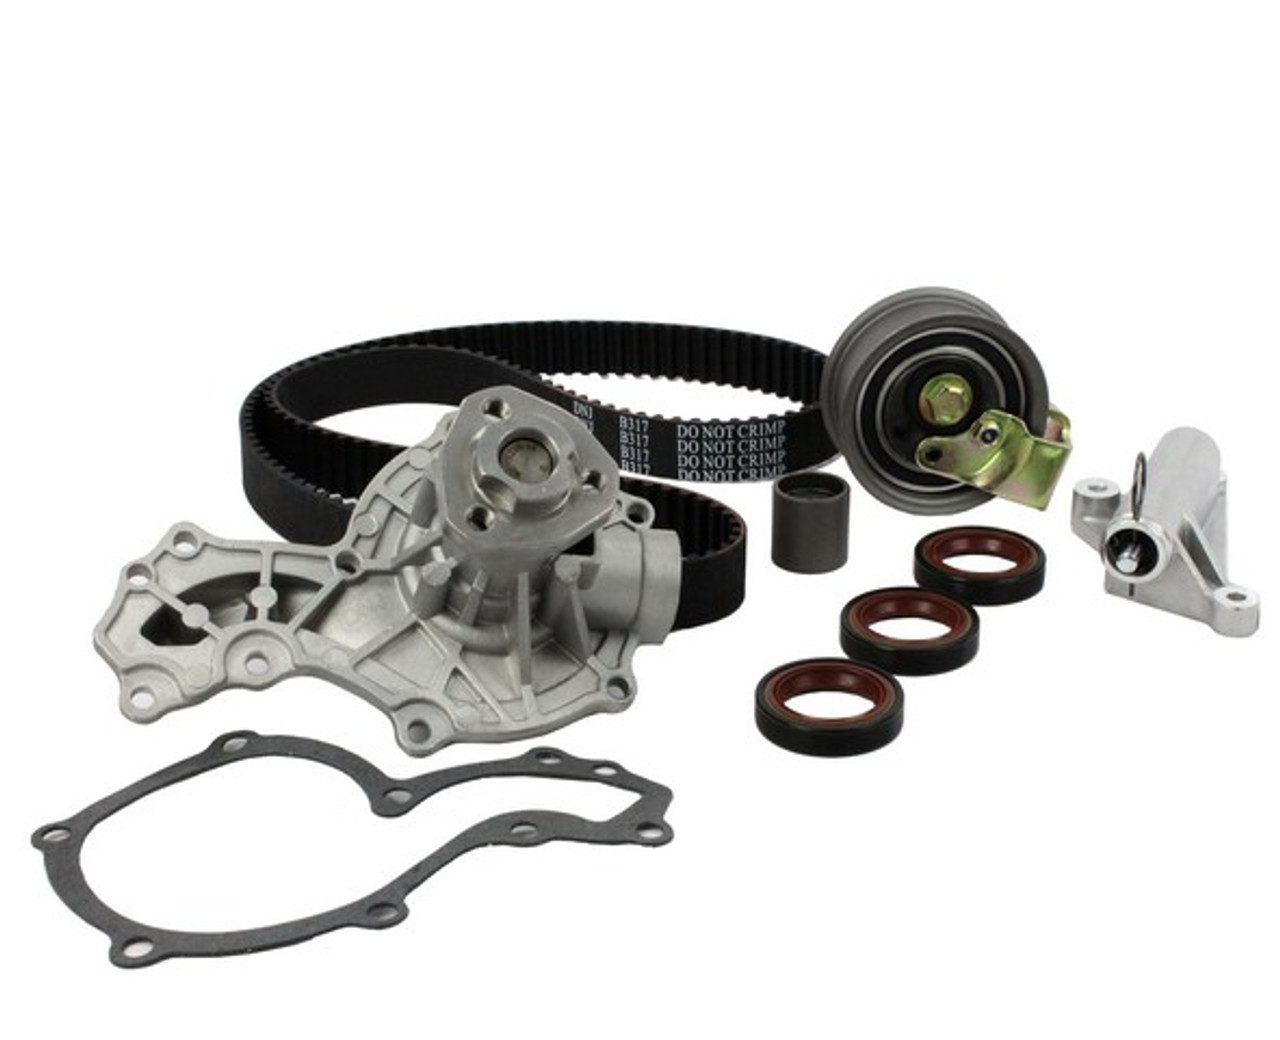 Timing Belt Kit with Water Pump 1.8L 1997 Audi A4 Quattro - TBK800AWP.1